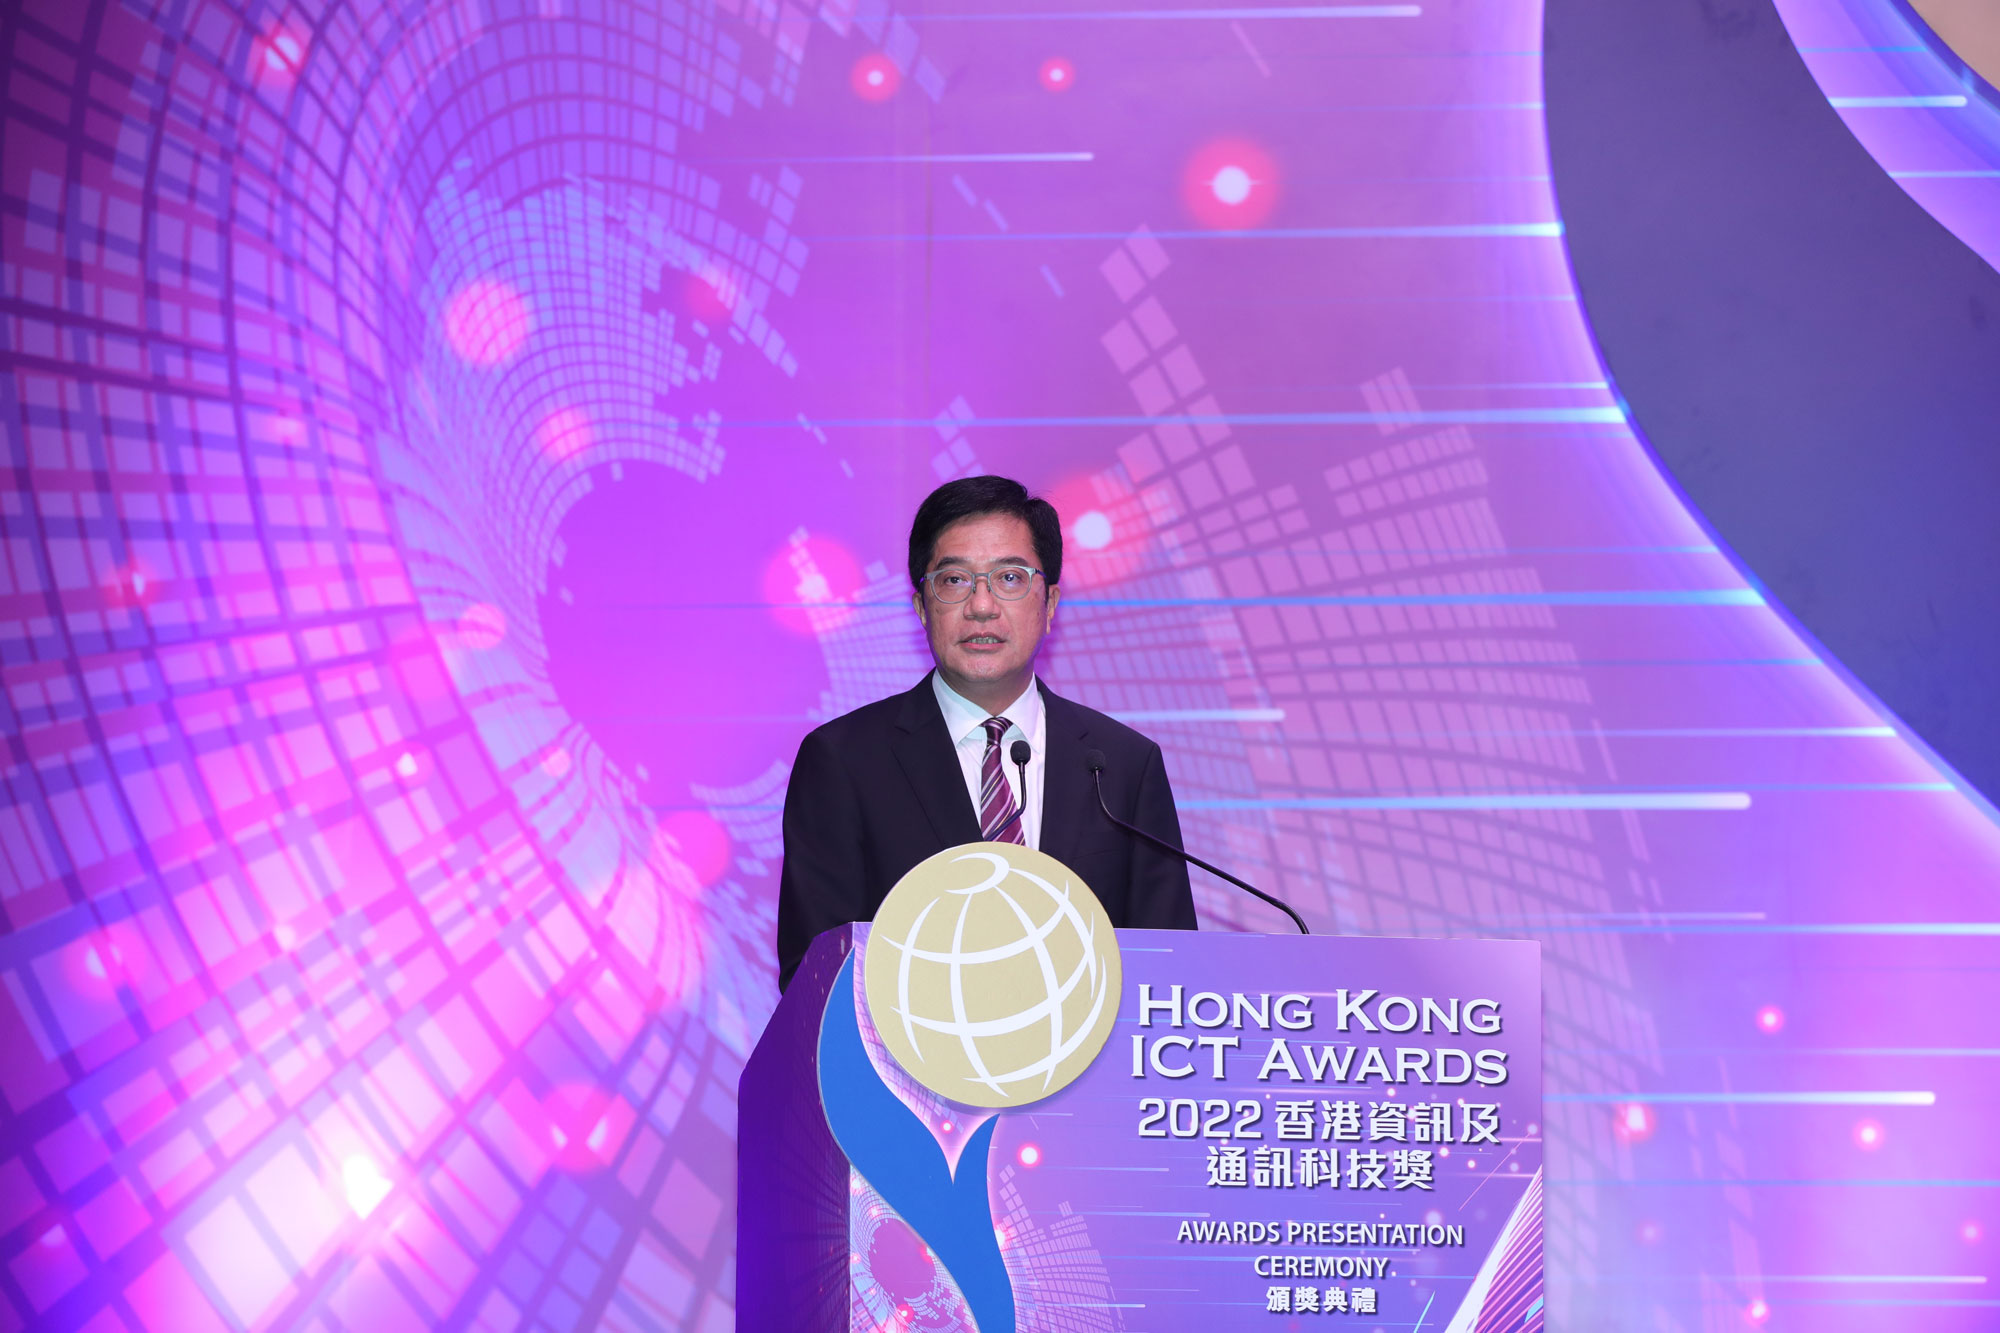 Mr Michael Wong, the Acting Financial Secretary, delivers the opening remarks at the Hong Kong ICT Awards 2022 Awards Presentation Ceremony.